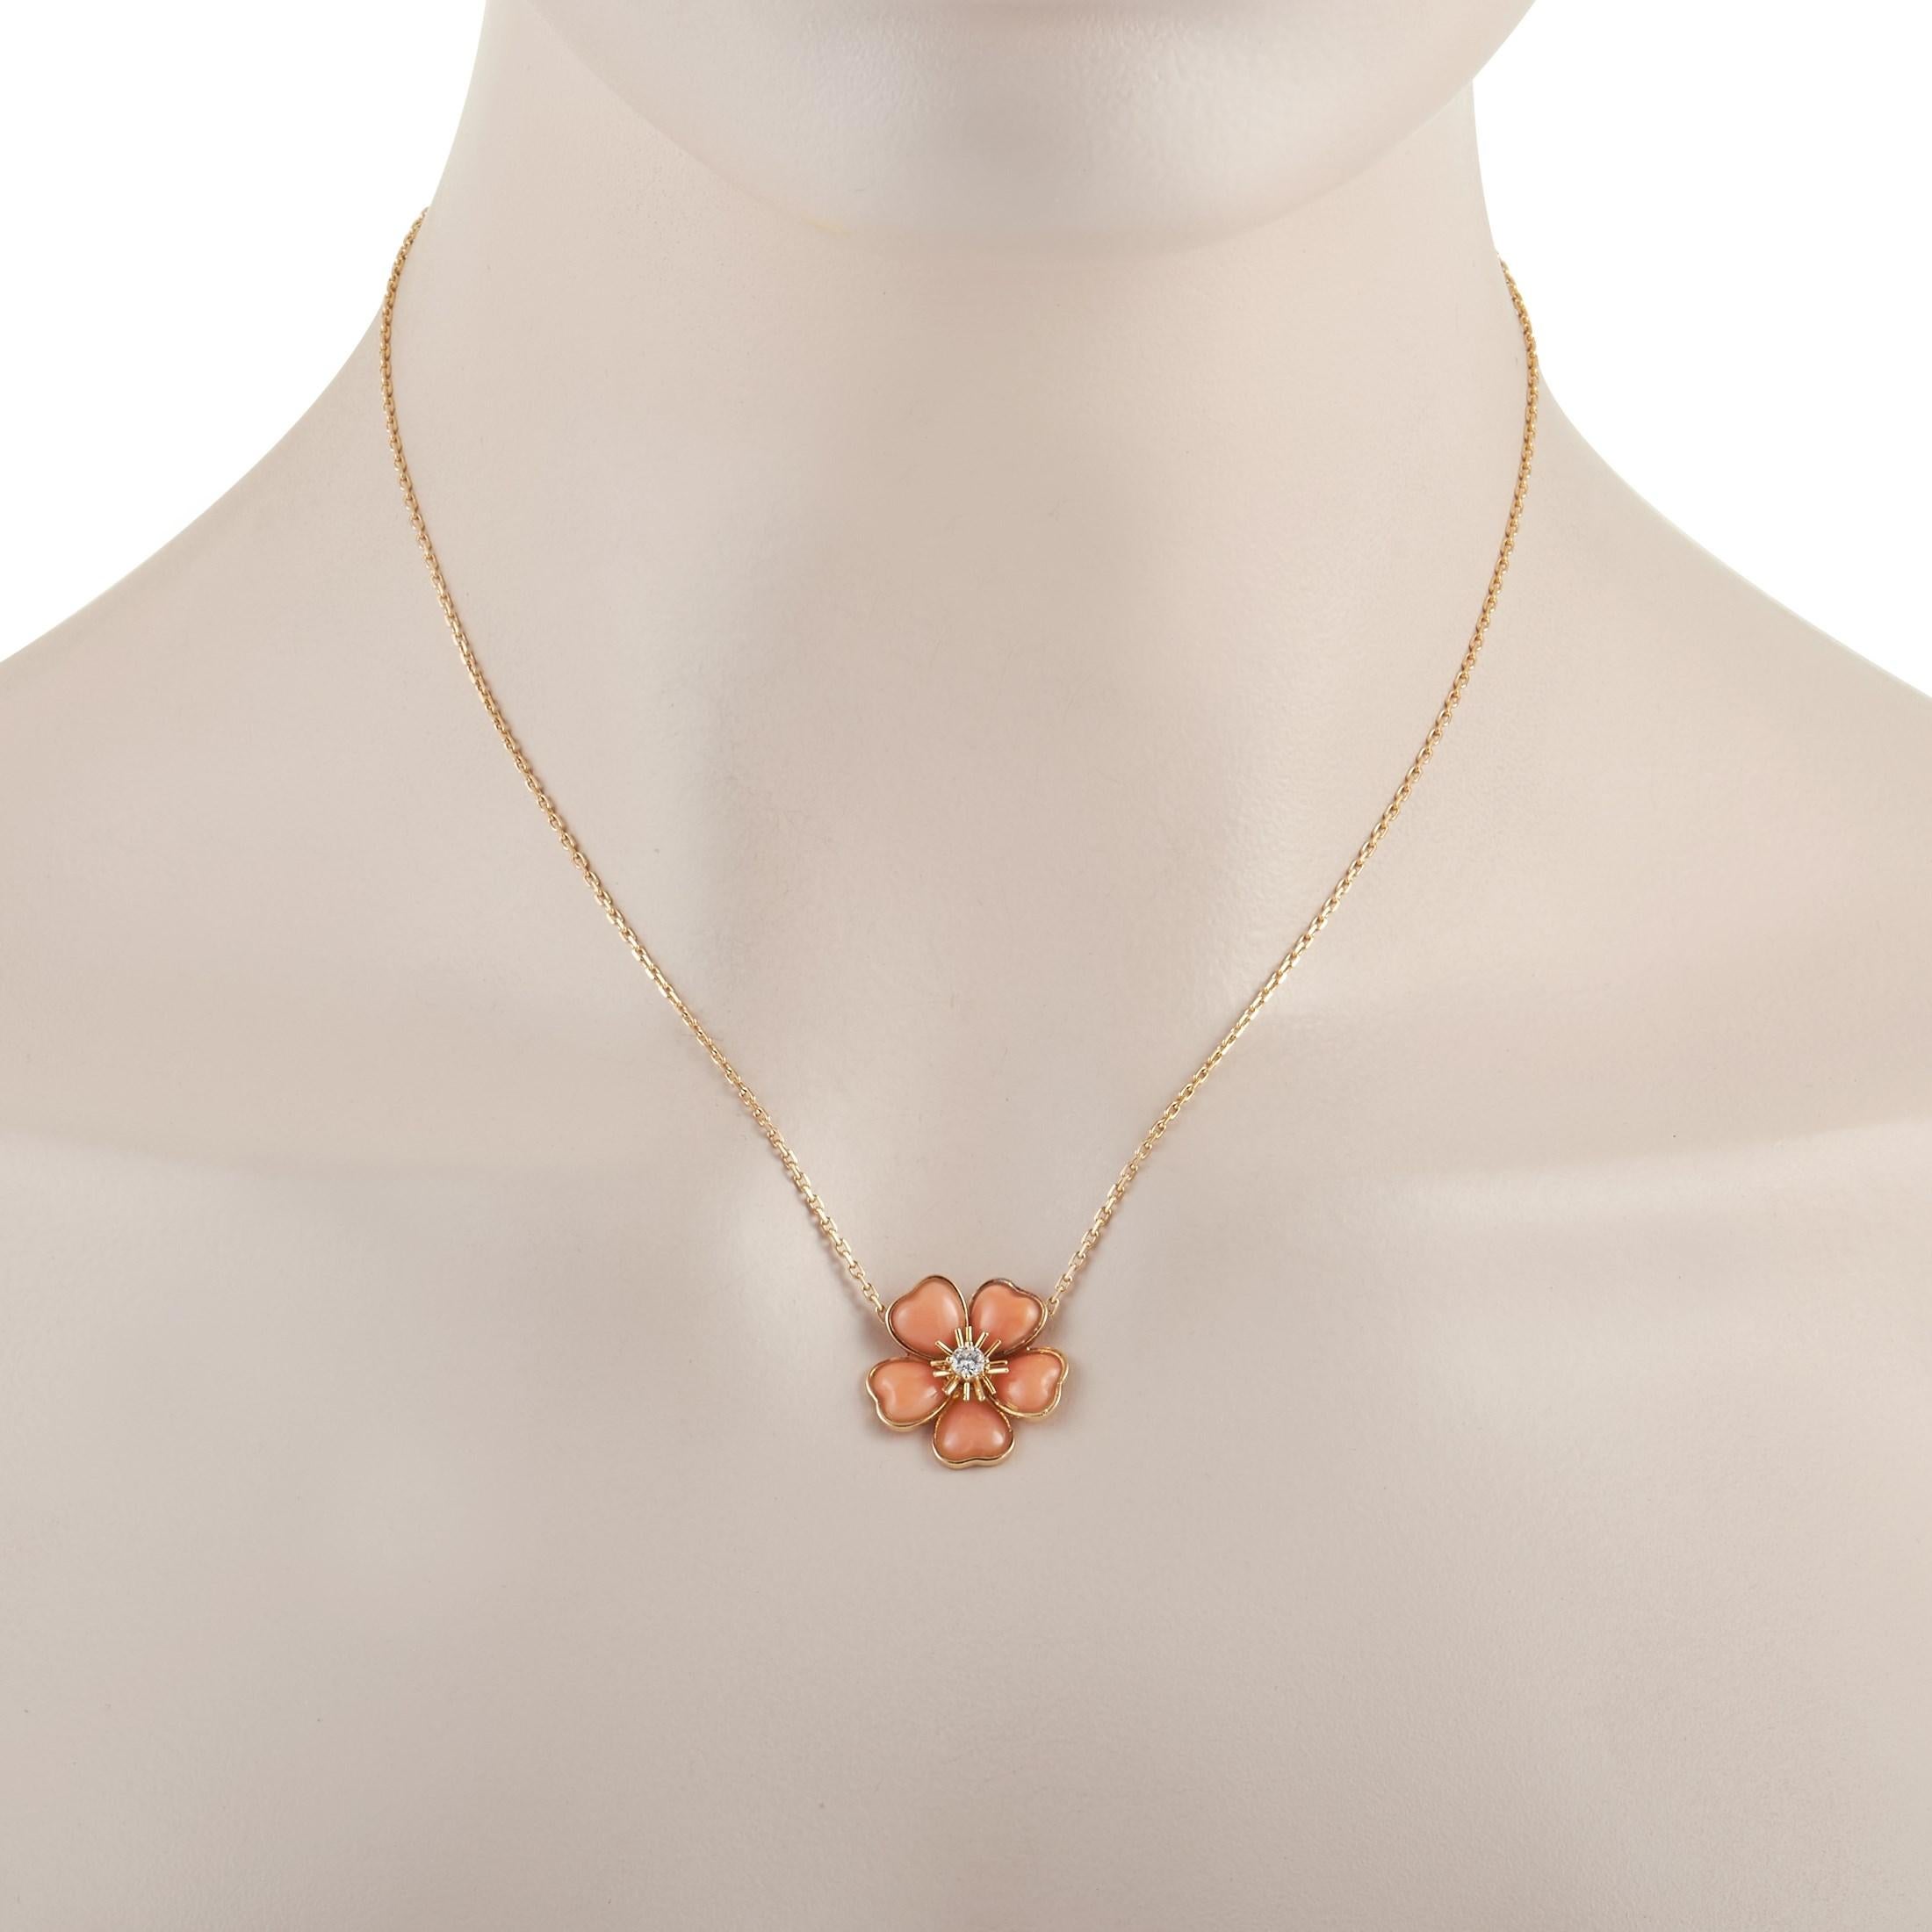 This Van Cleef & Arpels 18K Yellow Gold 0.12 ct Diamond Coral Flower Necklace is made with an 18K yellow gold chain, highlighting a beautiful 18K yellow gold flower pendant. Each flower petal is set with a pretty coral gemstone. The center of the